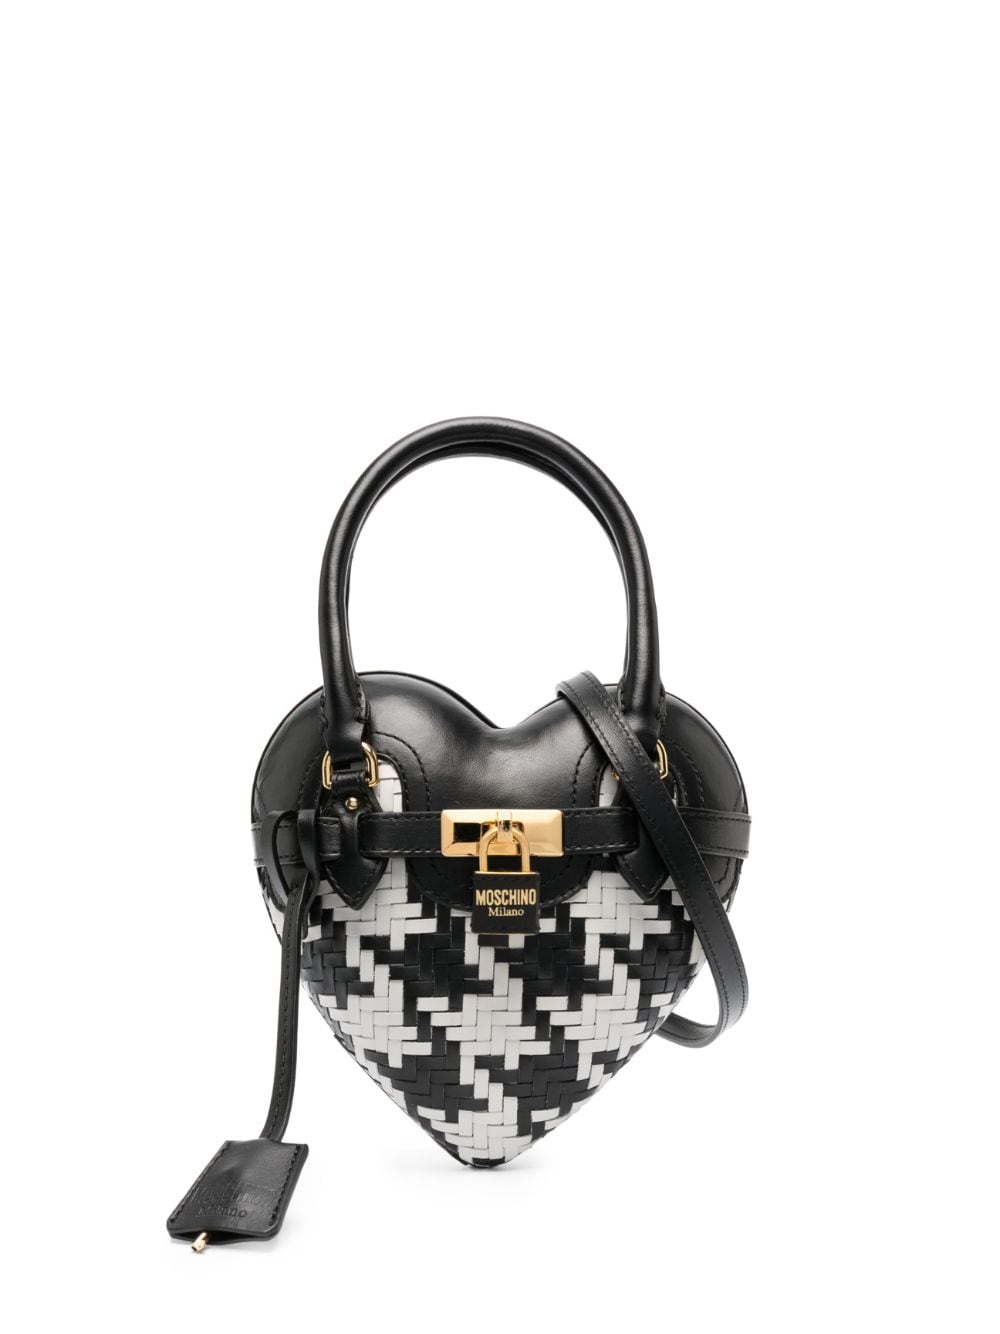 Image 1 of Moschino heart shaped woven bag